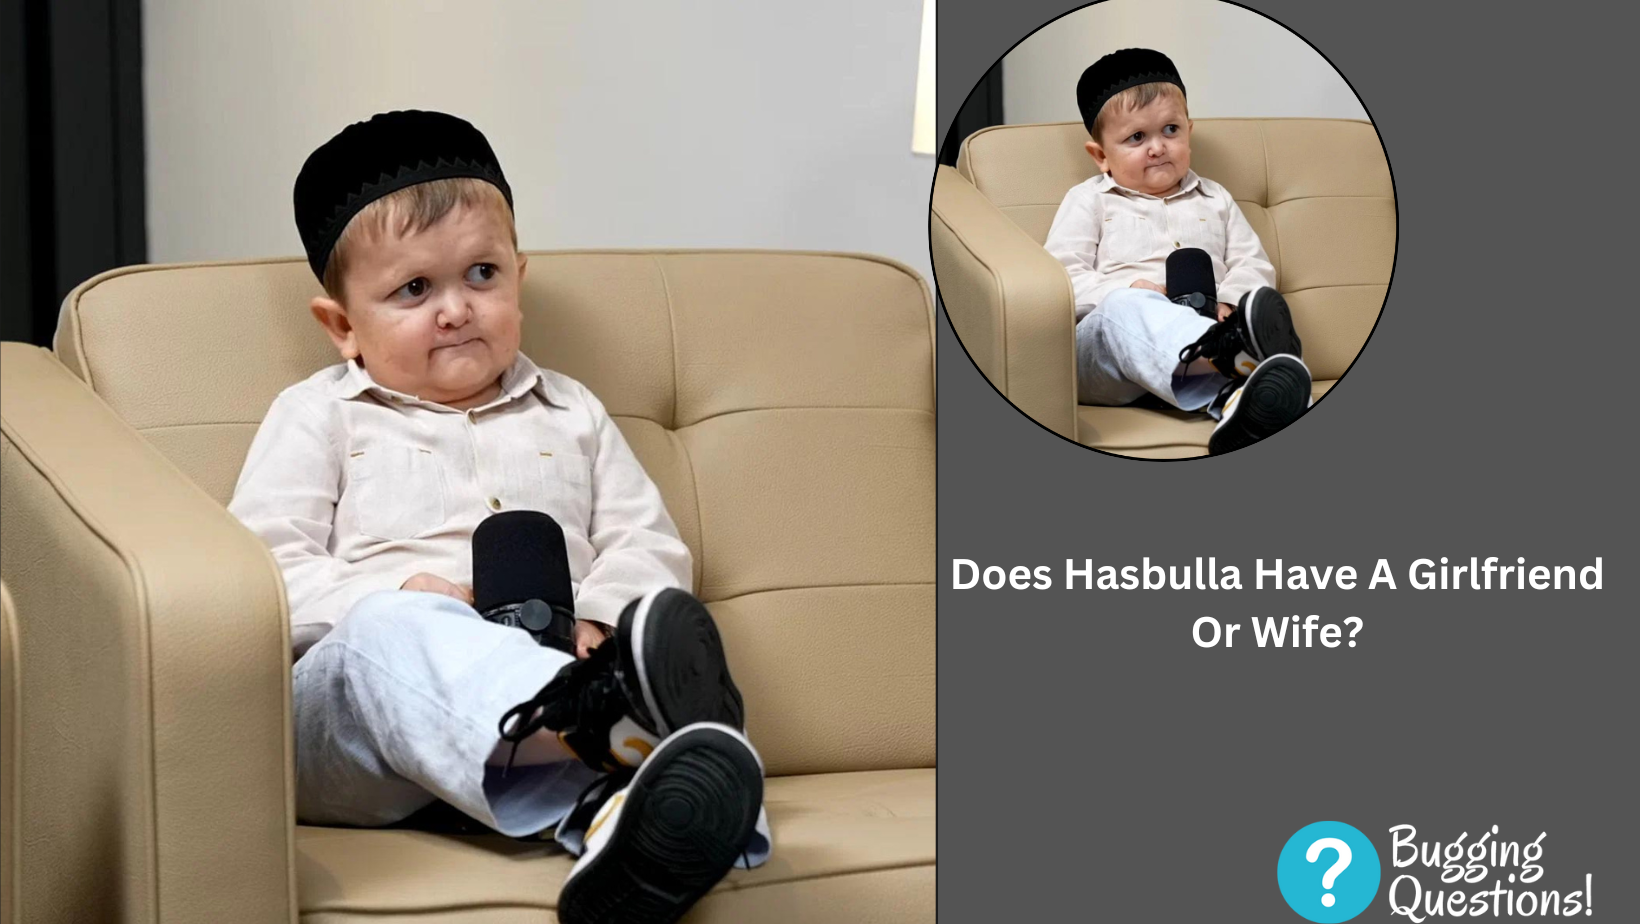 Does Hasbulla Have A Girlfriend Or Wife?